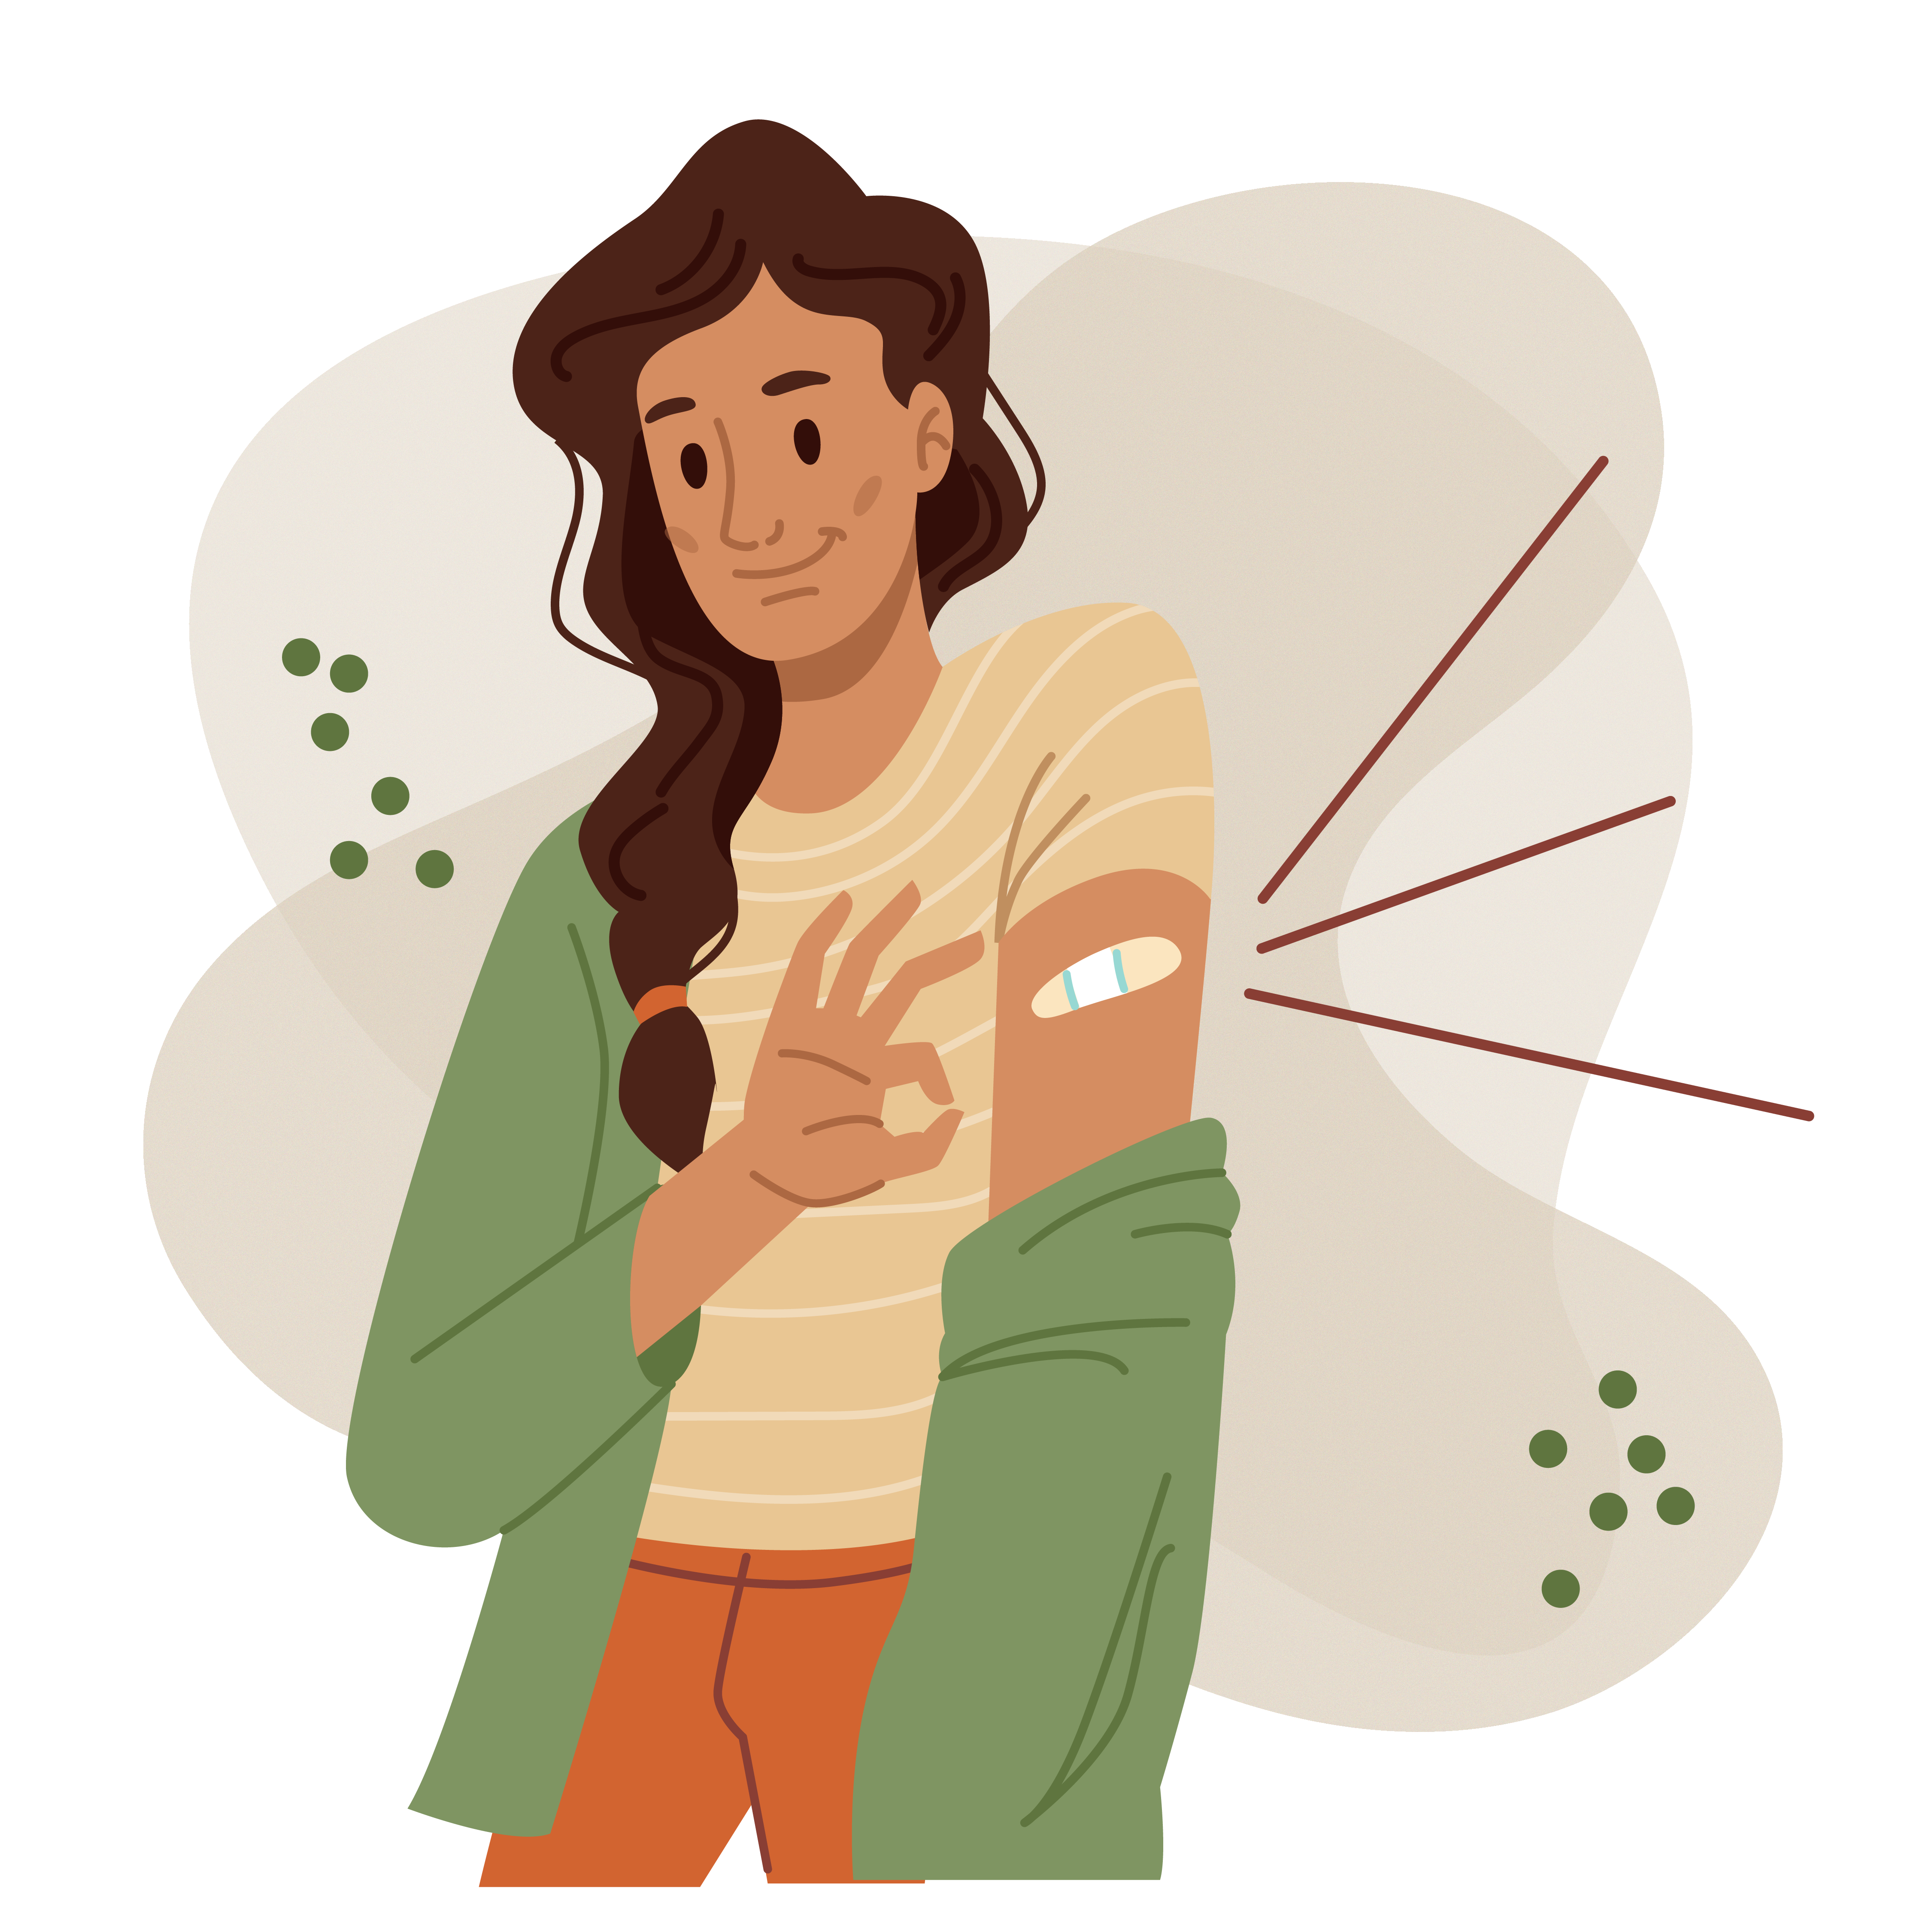 Stylized illustration of a person showing a bare sleeve and containing a bandage on their arm